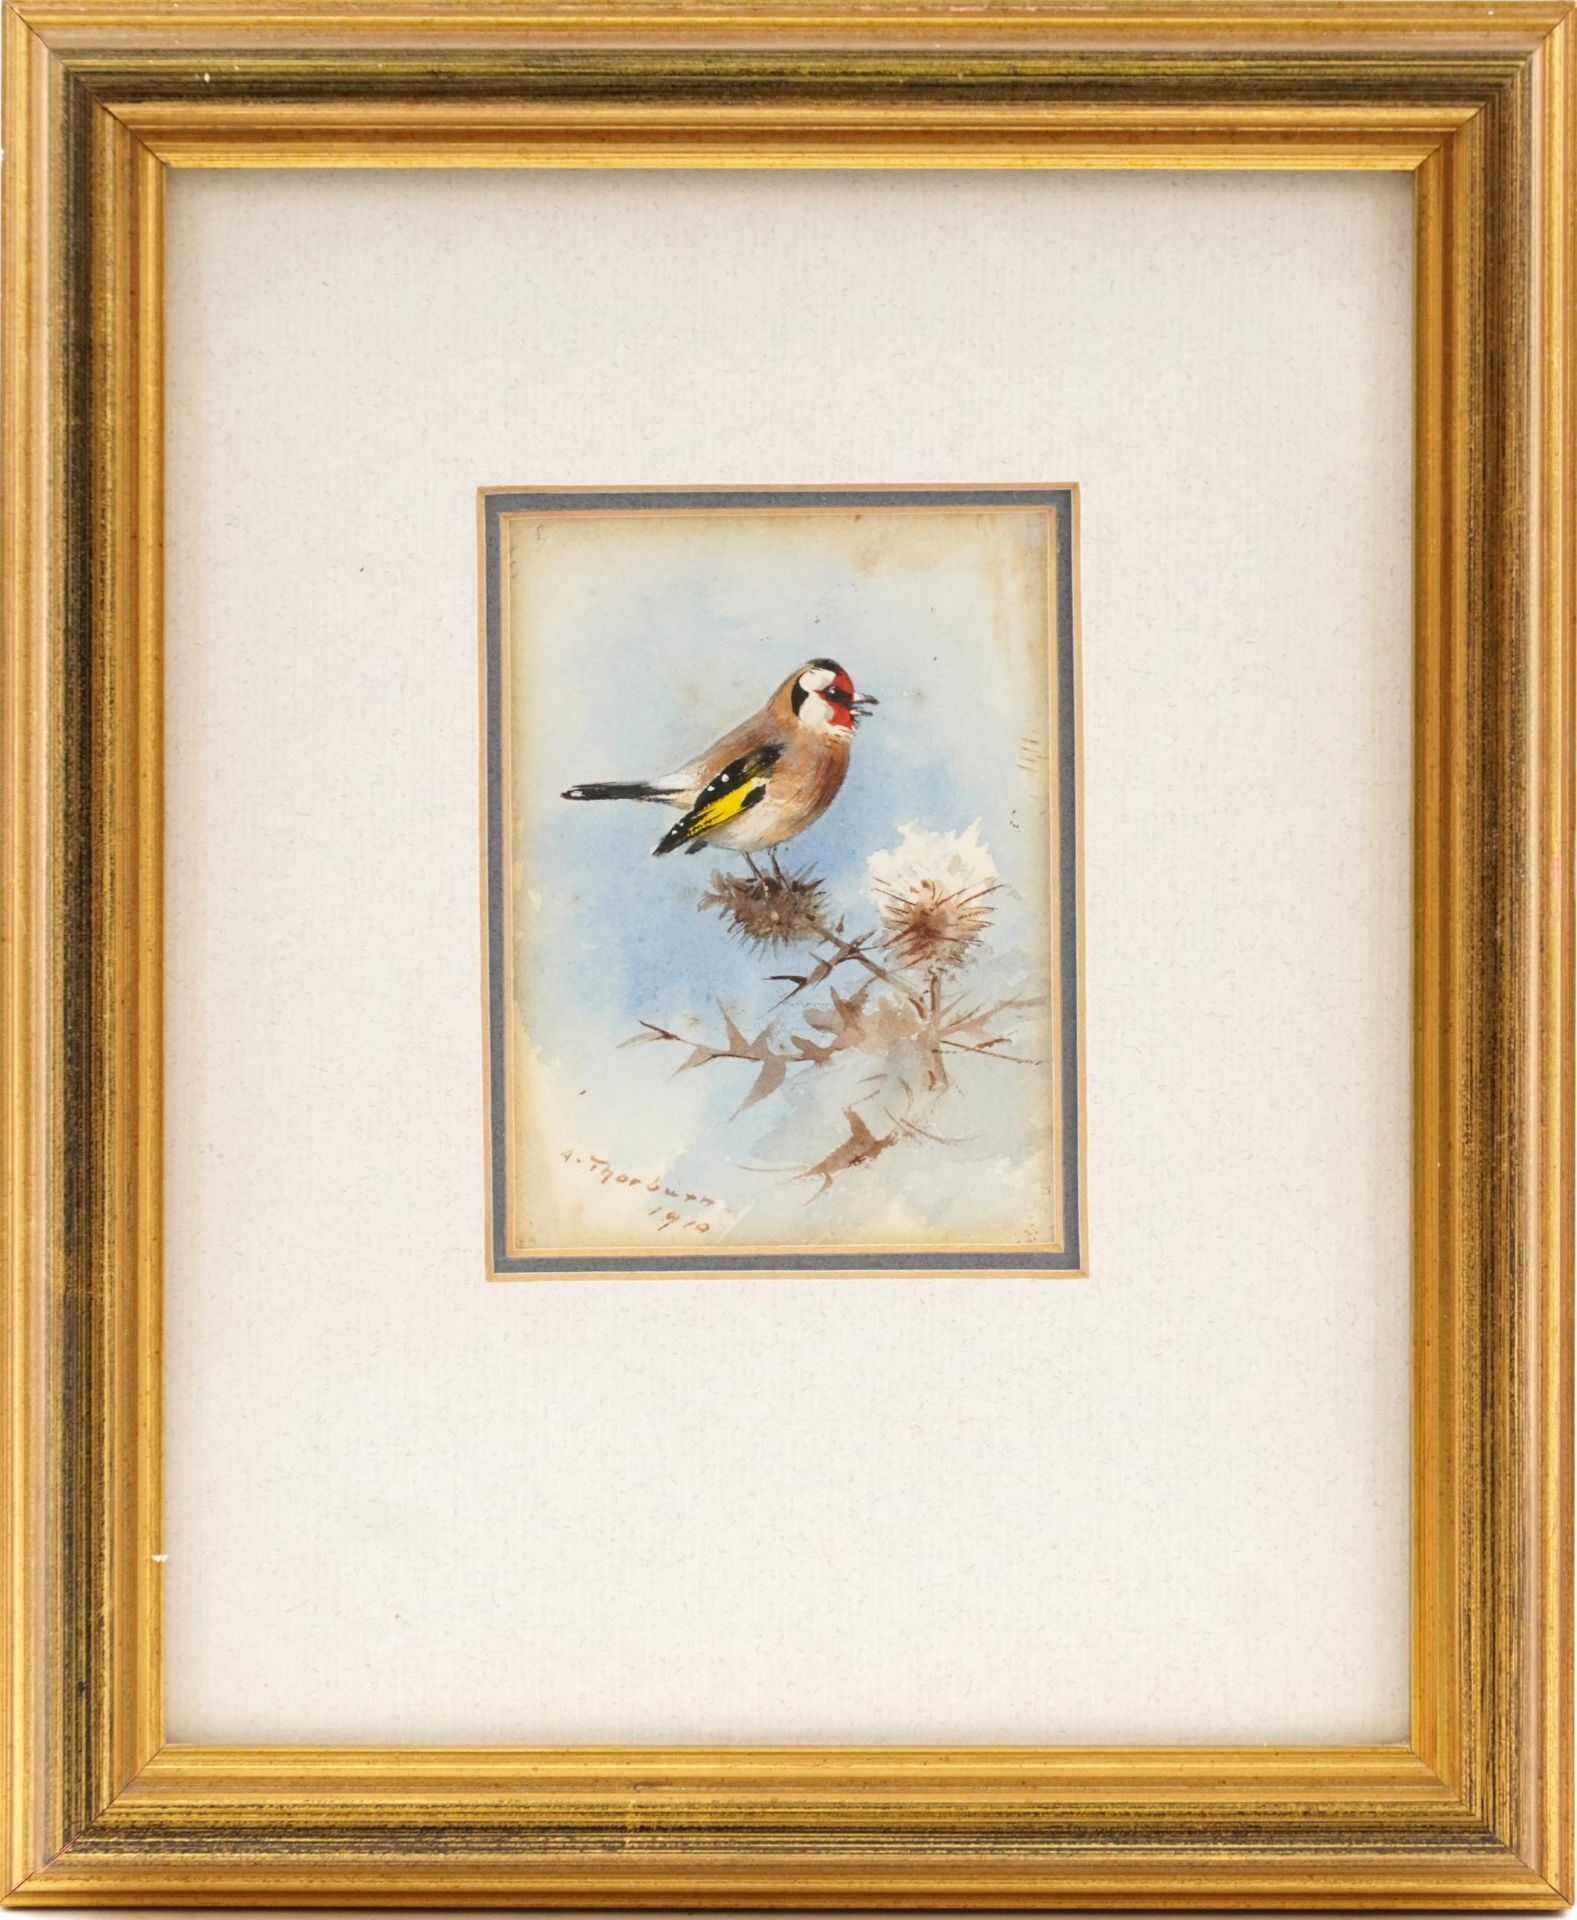 Archibald Thorburn - Goldfinch on a thistle, watercolour, New Year card sent to me by Archibald - Image 2 of 5